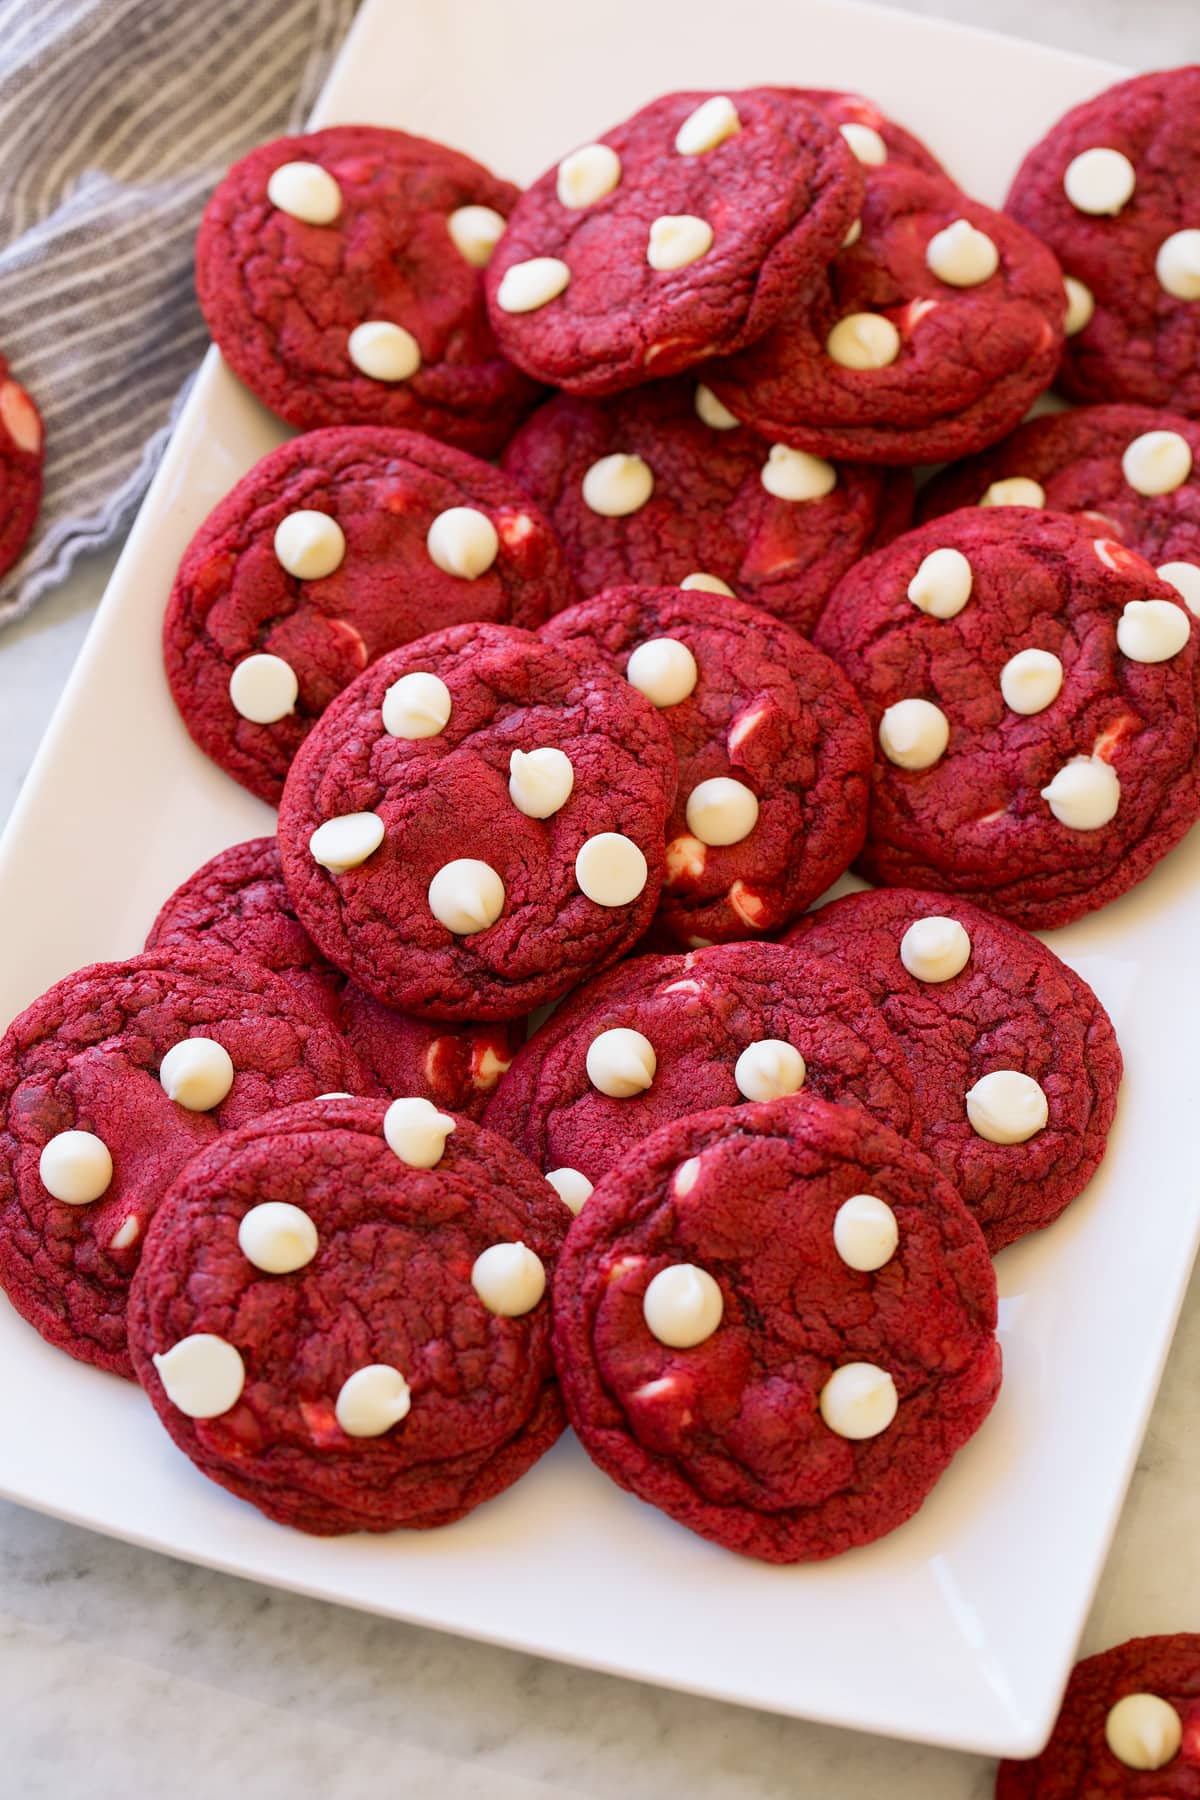 Red Velvet Cookies layered together, shown from a side angle on a platter.